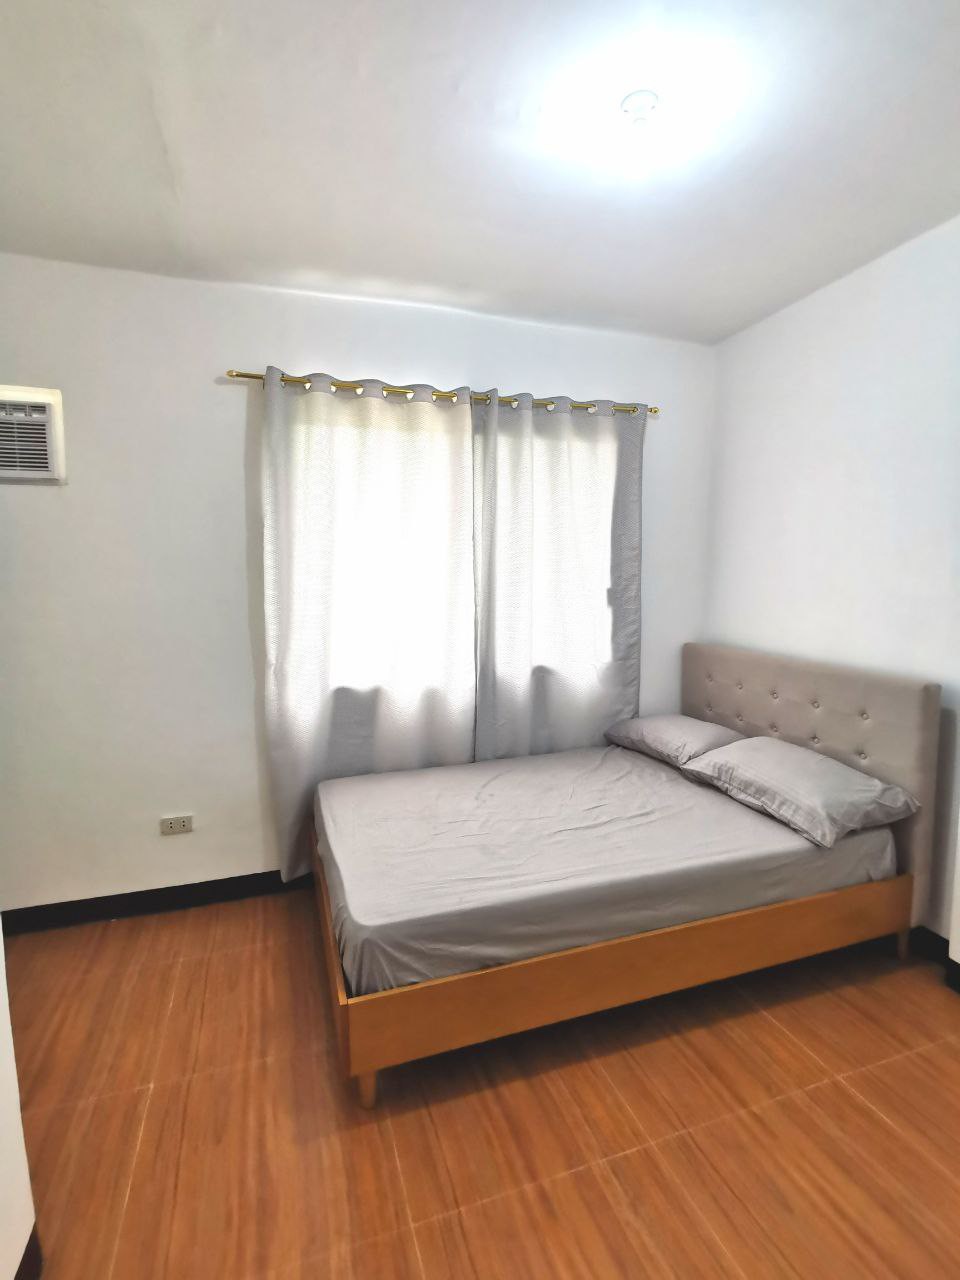 Affordable House for rent @ Bamboo Lane Uptown Cdo